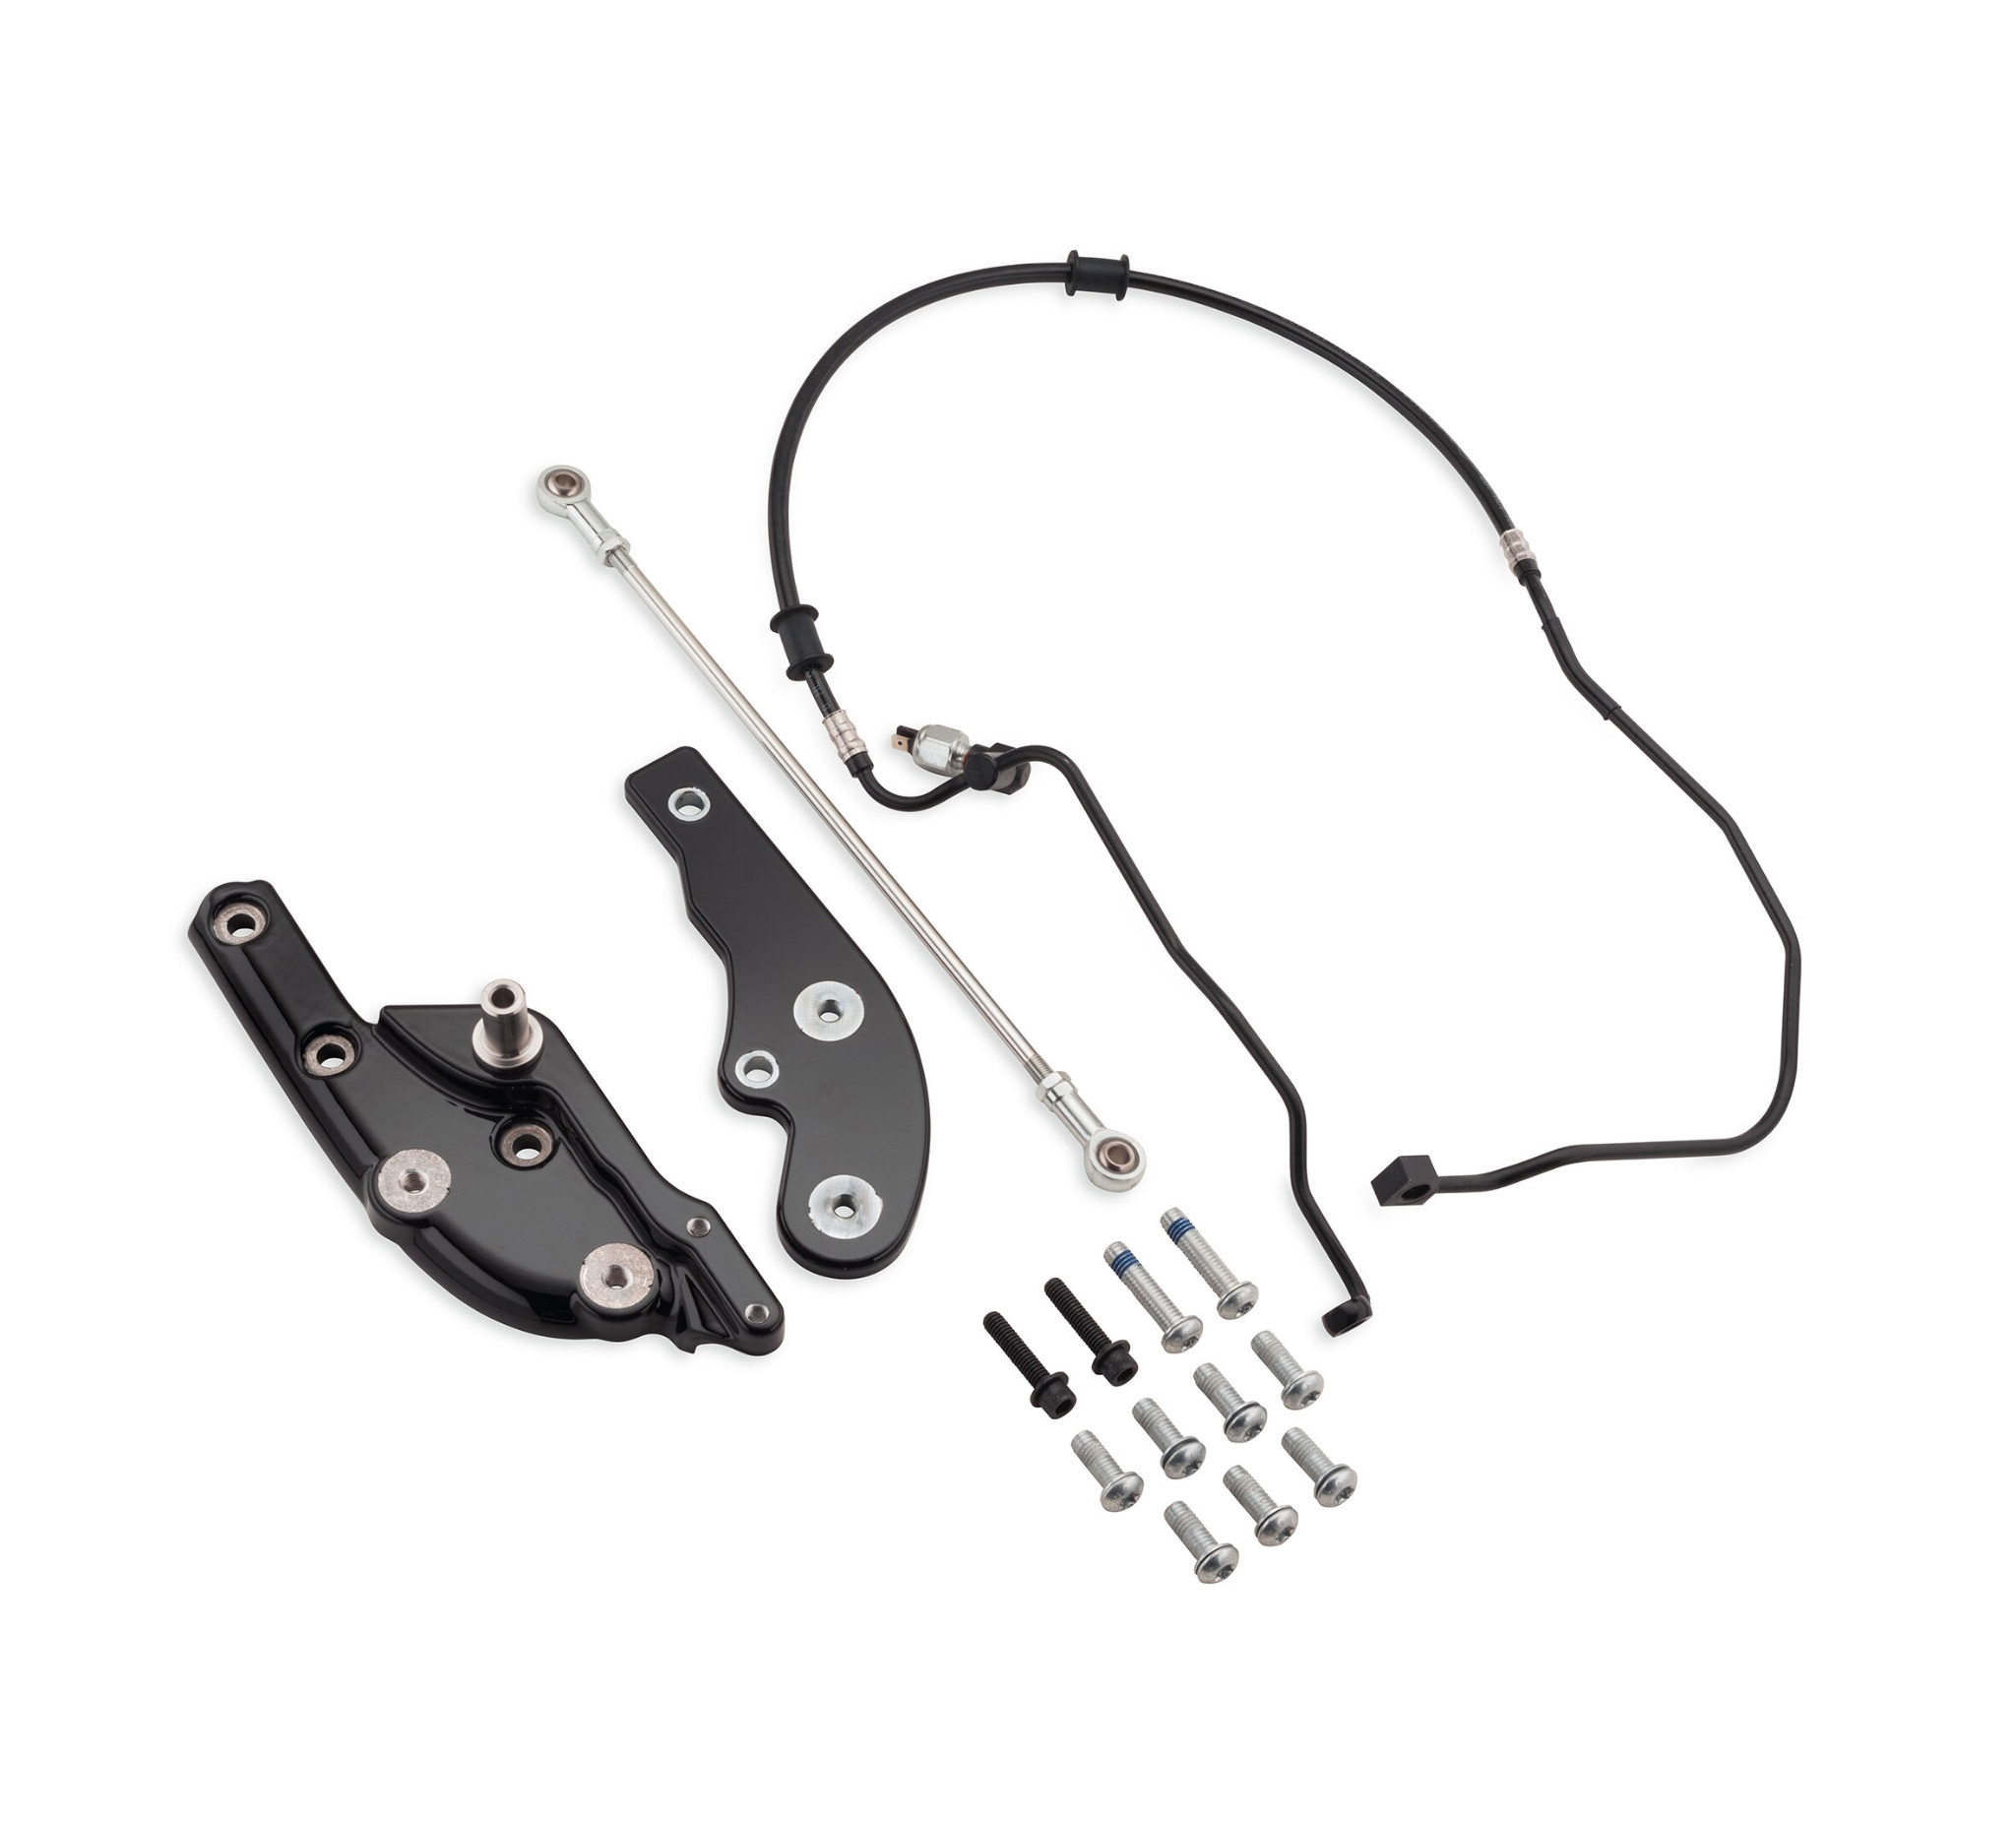 Extended Reach Forward Control Kit Abs 50500837 Harley Davidson Europe